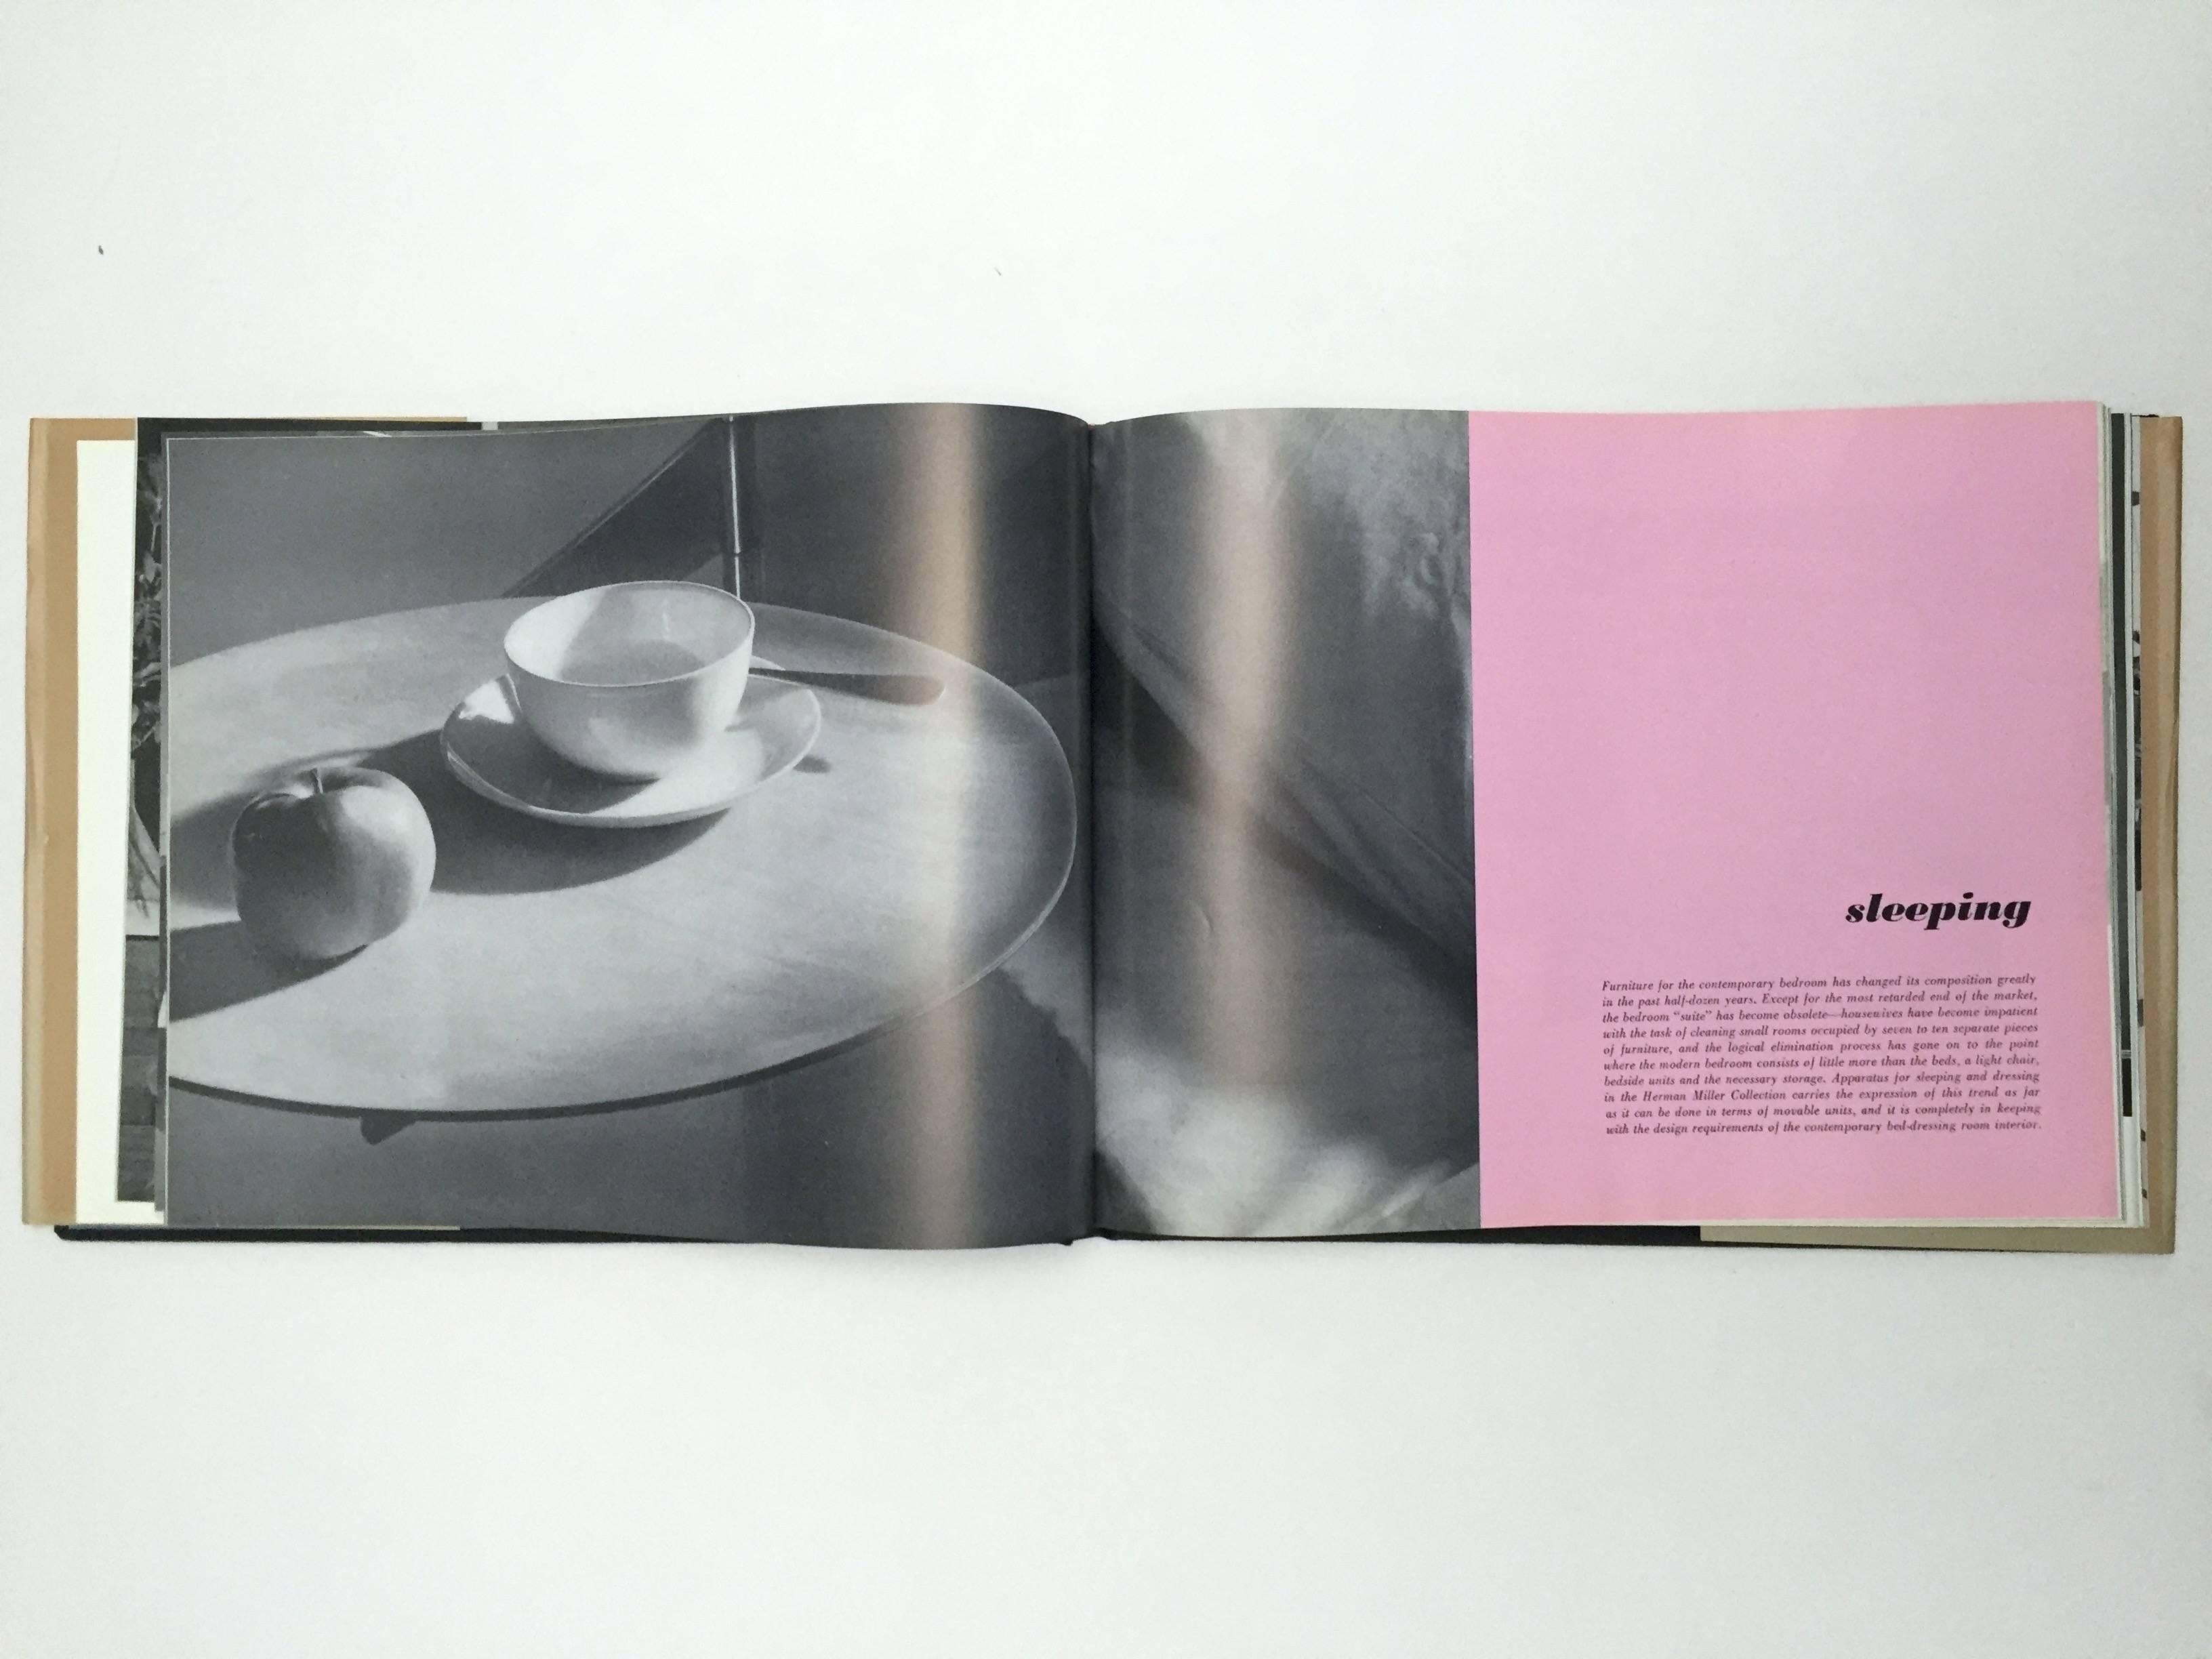 Published by Ancathus Press, 1995, New York.

A reprint of Herman Miller Company’s 1952 catalogue, including furniture works from the likes of Noguchi, Nelson and Eames.
This book effectively showcases some of the best and highest quality